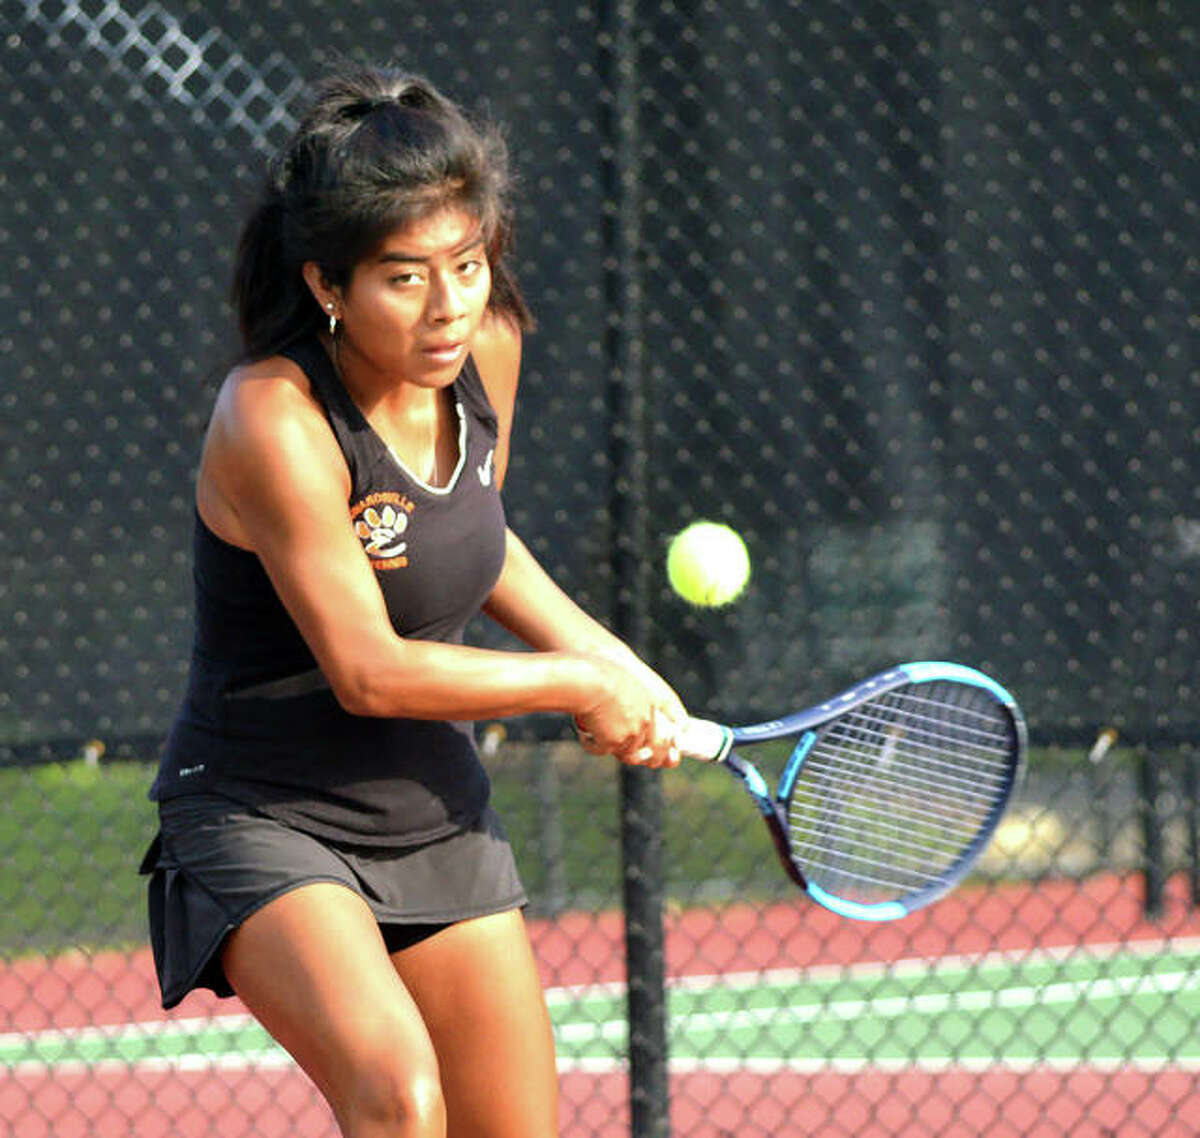 Edwardsville junior Chloe Trimpe hits a two-handed backhand during her No. 3 singles match Wednesday at St. Joseph’s Academy.